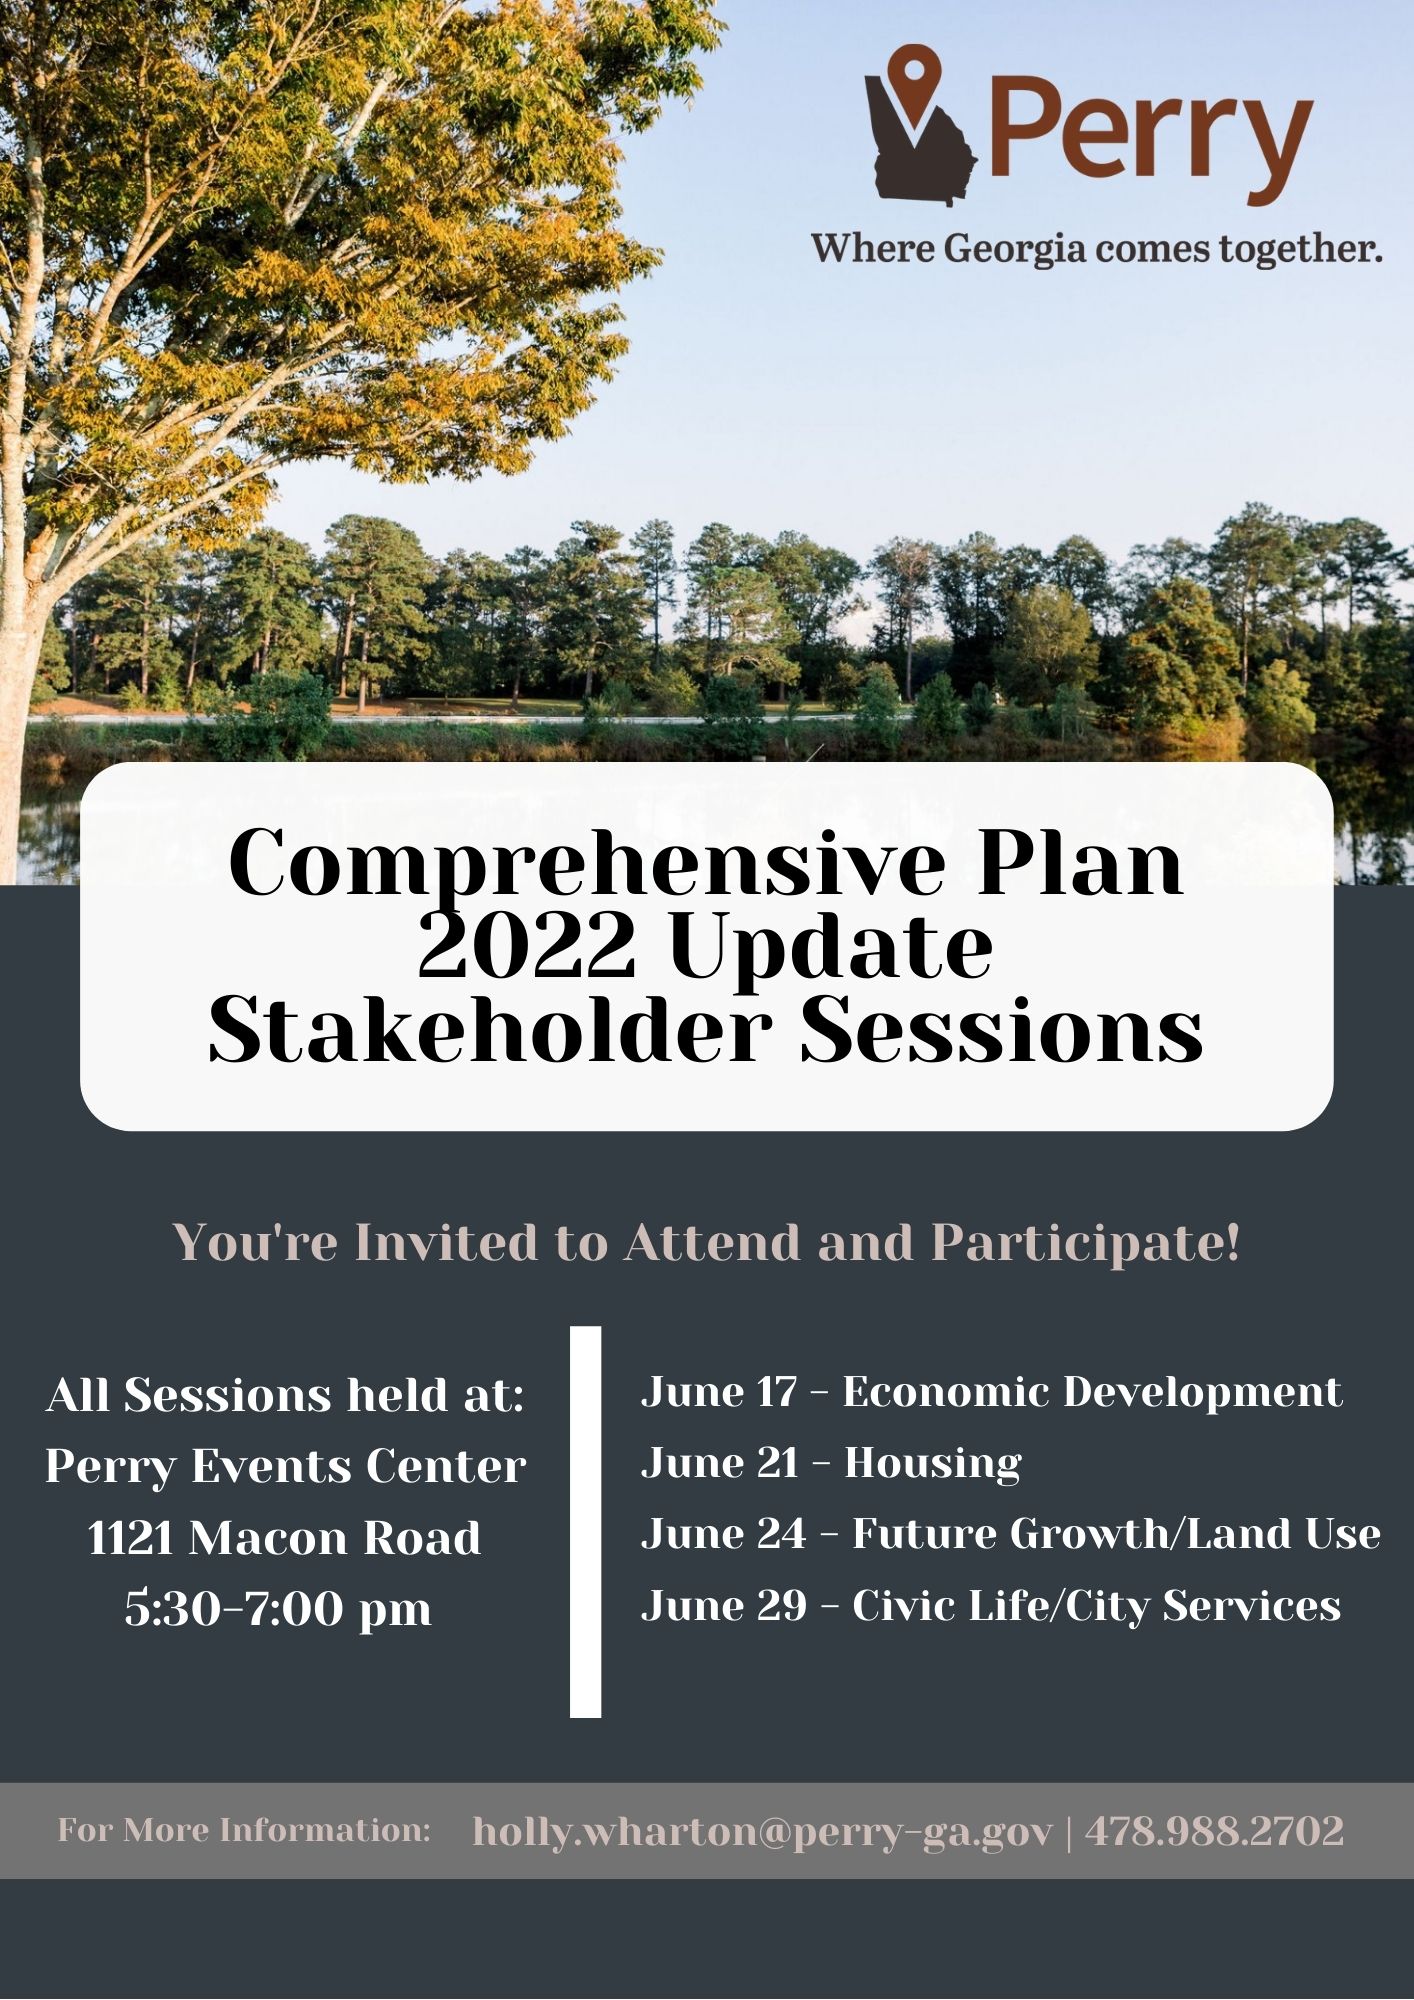 Photo for Comprehensive Plan Stakeholder Sessions